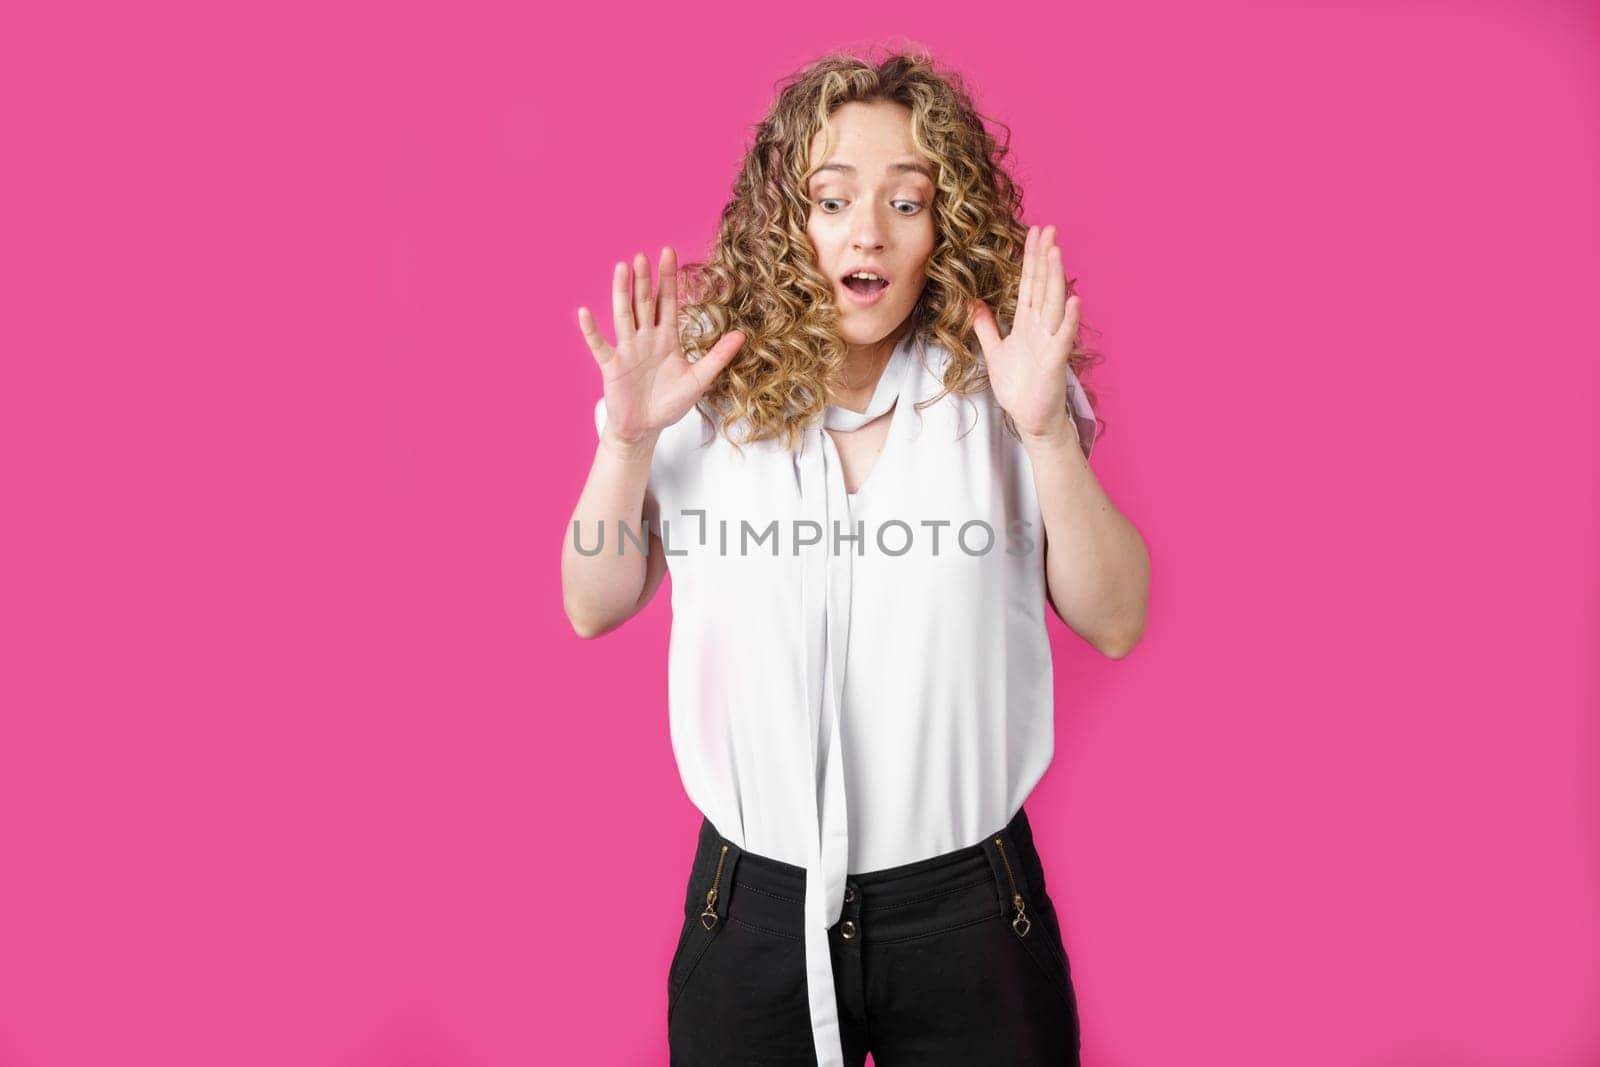 Young woman expressing emotions, raised her hands up. Female portrait. Isolated on pink background